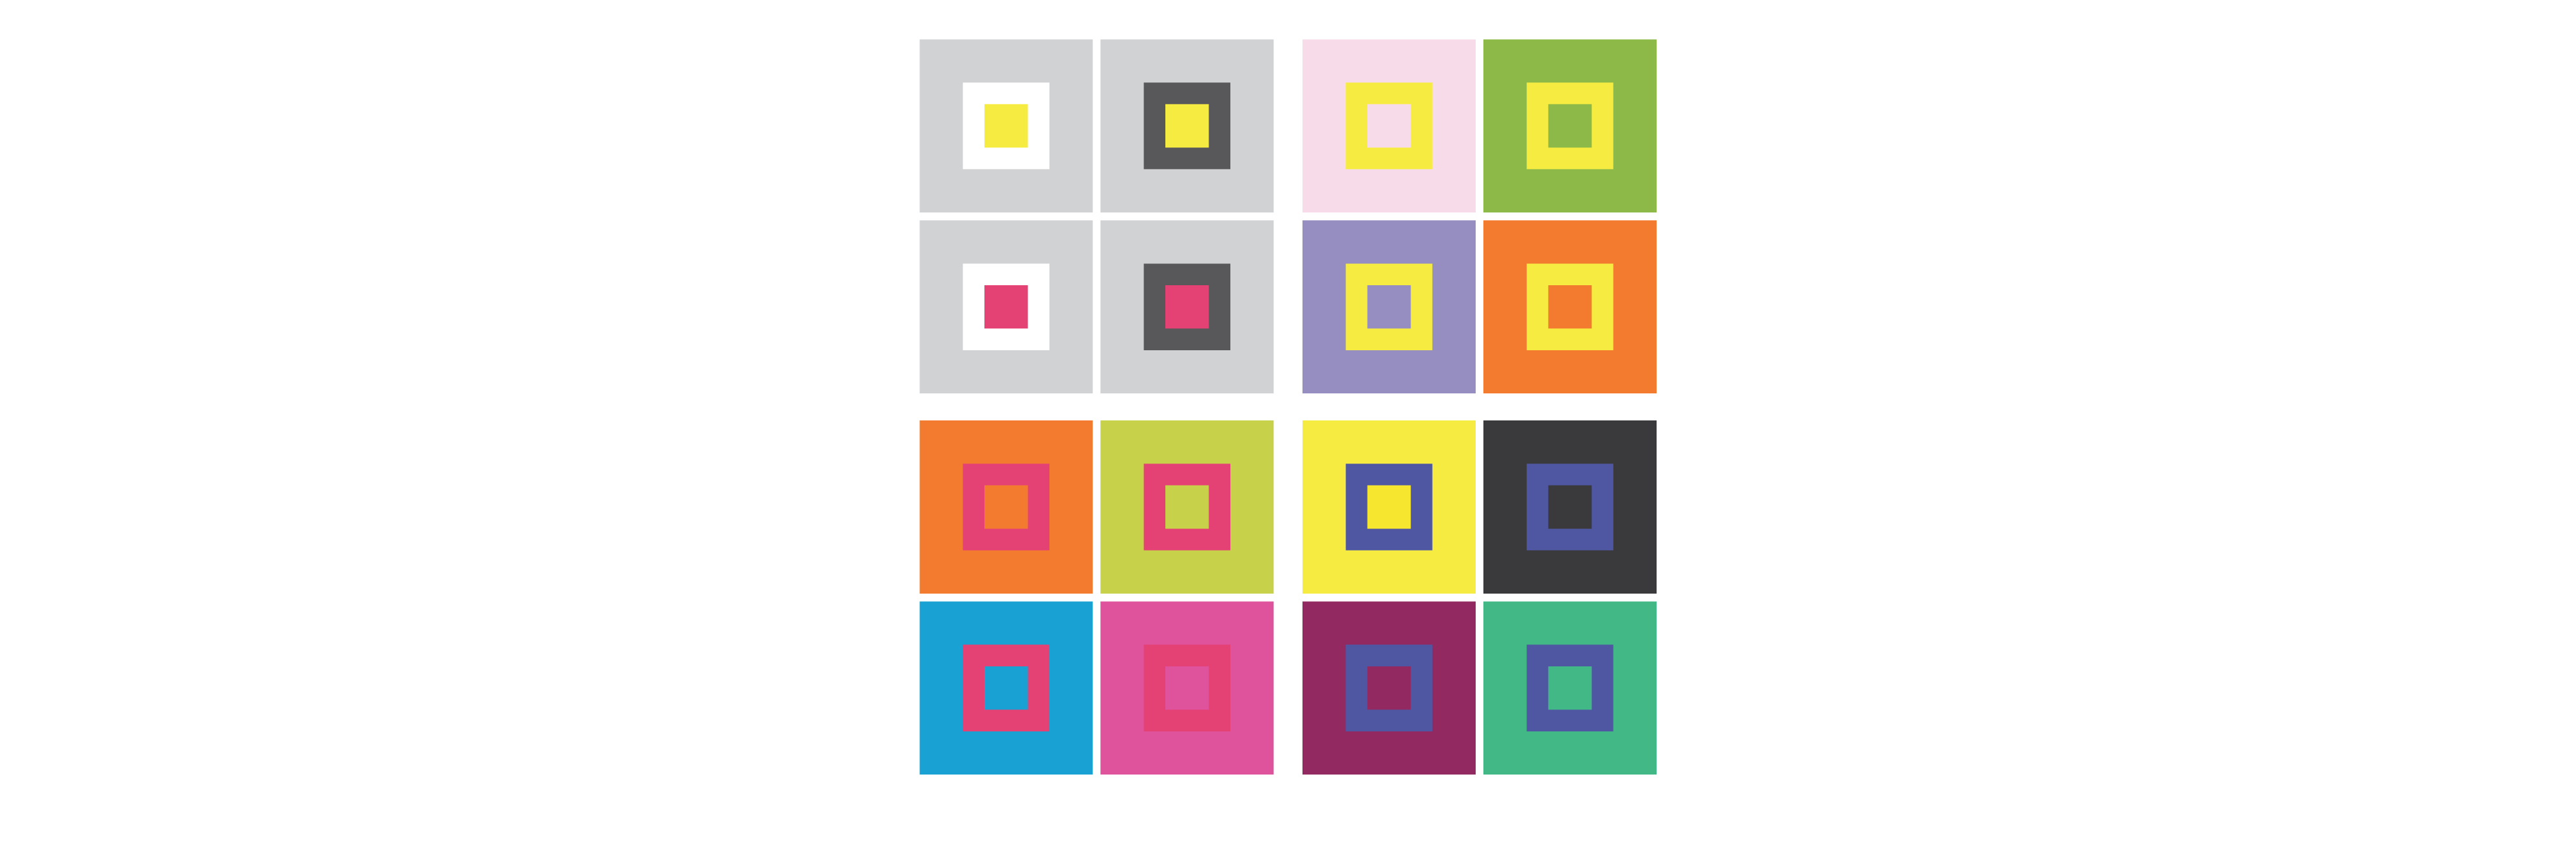 4 sections with 4 squares in each section make up one larger square. Each section shows a different example of colour combinations that create Zing. All four squares in the top left section are light grey. The top left square has a smaller white square in the centre, with a smaller yellow square in its centre. The top right square has a smaller black square in the centre, with a smaller yellow square in its centre. The bottom left square has a smaller white square in the centre, with a smaller pink square in its centre. The bottom right square has a smaller black square in the centre, with a smaller pink square in its centre. All squares in the top right section are different colours. The top left square is light pink and has a smaller yellow square in the centre, with a smaller light pink square in its centre. The top right square is green and has a smaller yellow square in the centre, with a smaller green square in its centre. The bottom left square is purple and has a smaller yellow square in the centre, with a smaller purple square in its centre. The bottom right square is orange and has a smaller yellow square in the centre, with a smaller orange square in its centre. All squares in the bottom left section are different colours. The top left square is orange and has a smaller dark pink square in the centre, with a smaller orange square in its centre. The top right square is lime green and has a smaller dark pink square in the centre, with a smaller lime green square in its centre. The bottom left square is blue and has a smaller dark pink square in the centre, with a smaller blue square in its centre. The bottom right square is hot pink and has a smaller dark pink square in the centre, with a smaller hot pink square in its centre. All squares in the bottom right section are different colours. The top left square is yellow and has a smaller purple square in the centre, with a smaller yellow square in its centre. The top right square is black and has a smaller purple square in the centre, with a smaller black square in its centre. The bottom left square is burgundy and has a smaller purple square in the centre, with a burgundy square in its centre. The bottom right square is turquoise and has a smaller purple square in the centre, with a smaller turquoise square in its centre.